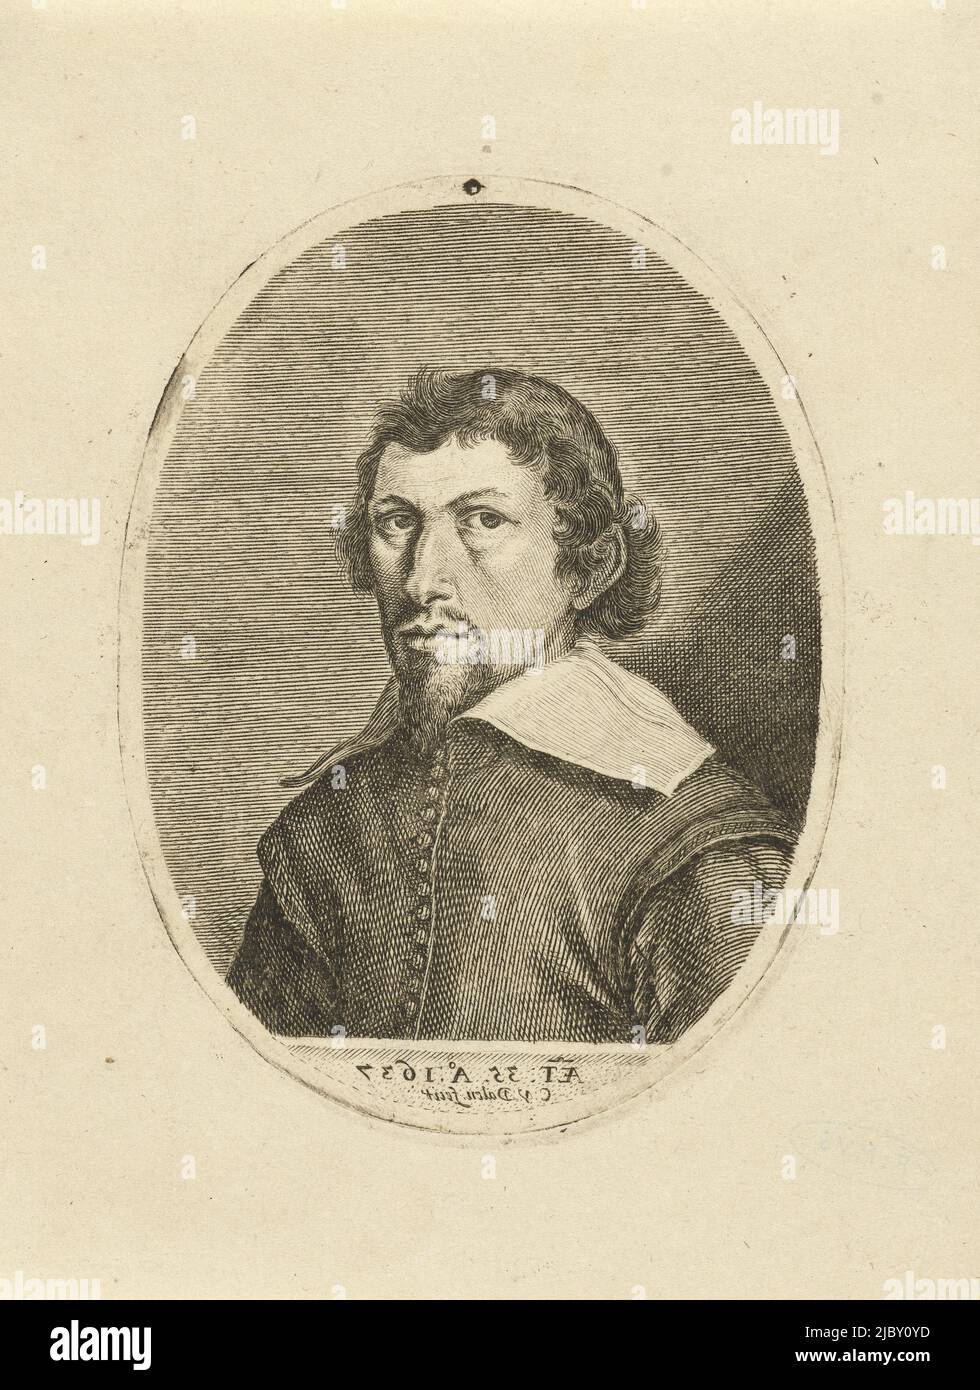 Self-Portrait at 35 years of age, print maker: Cornelis van Dalen (I), (mentioned on object), Cornelis van Dalen (I), Great Britain, 1637, paper, engraving, h 110 mm × w 84 mm Stock Photo